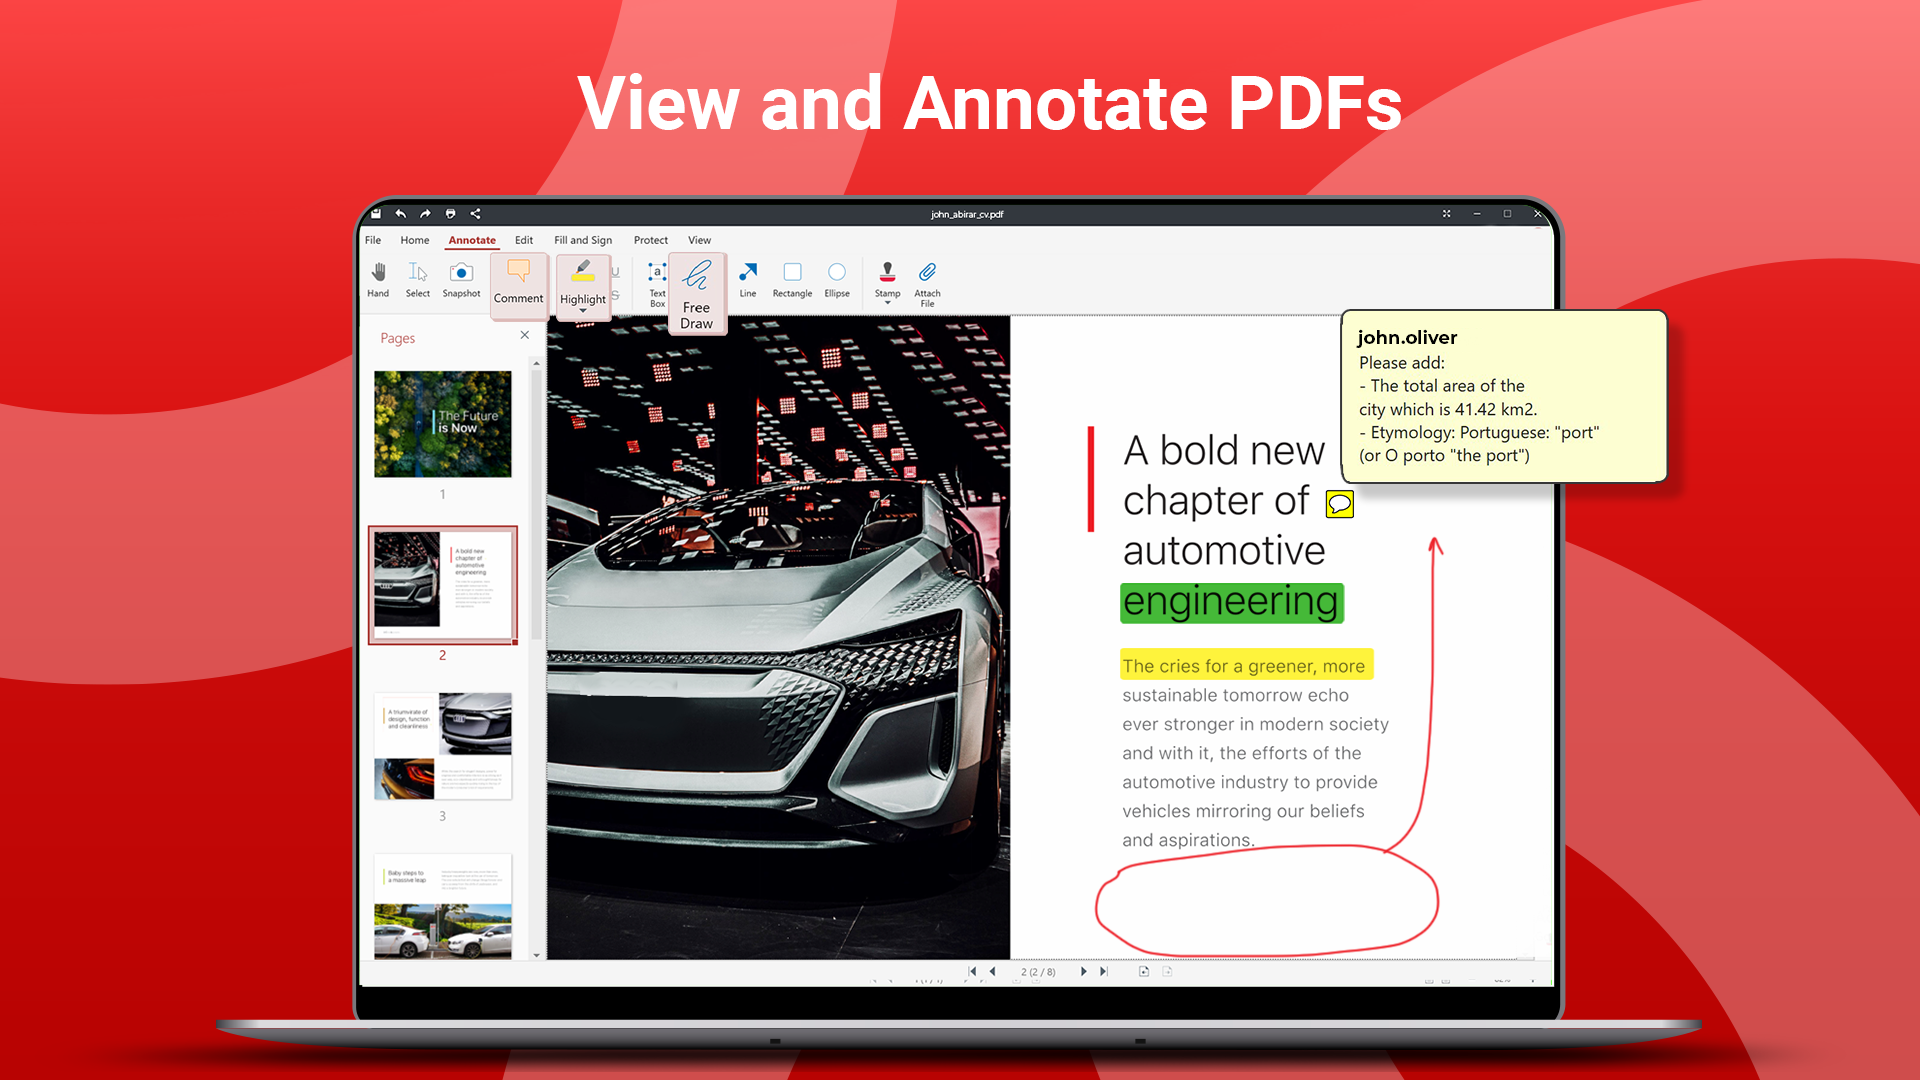 View and Annotate PDFs